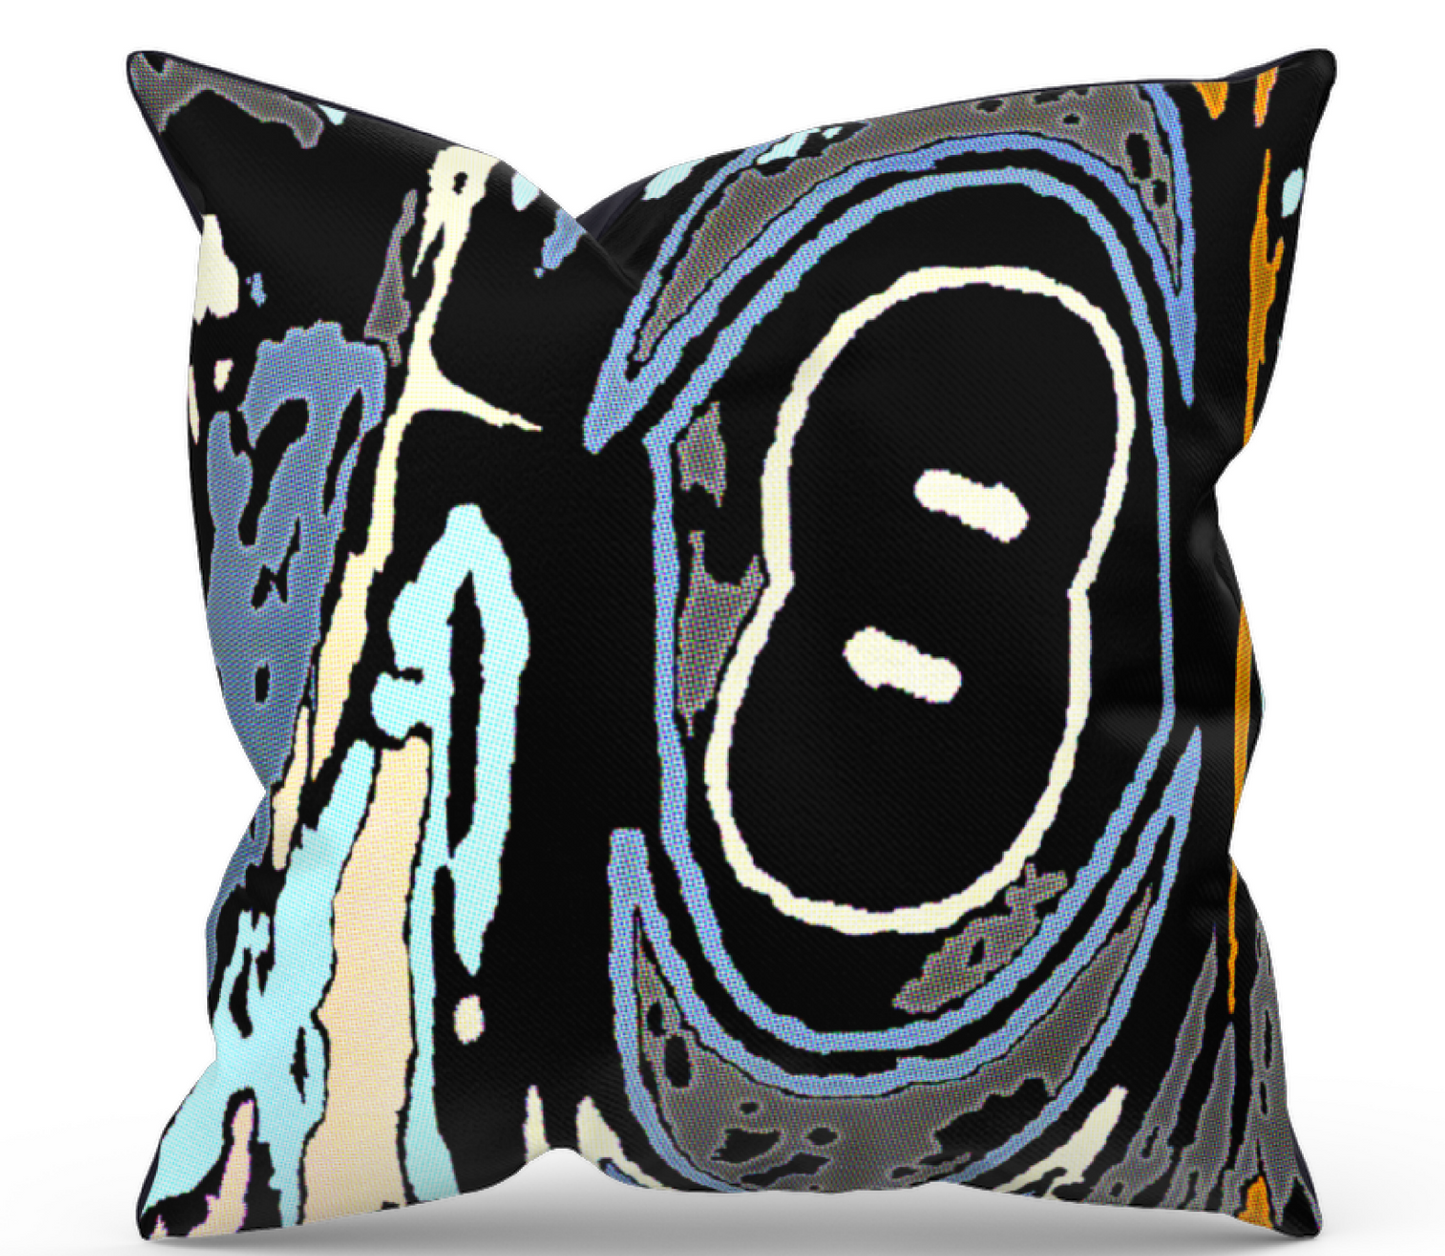 Abstract pillow cover with graphic blue swirls created by Katy Kidd. 